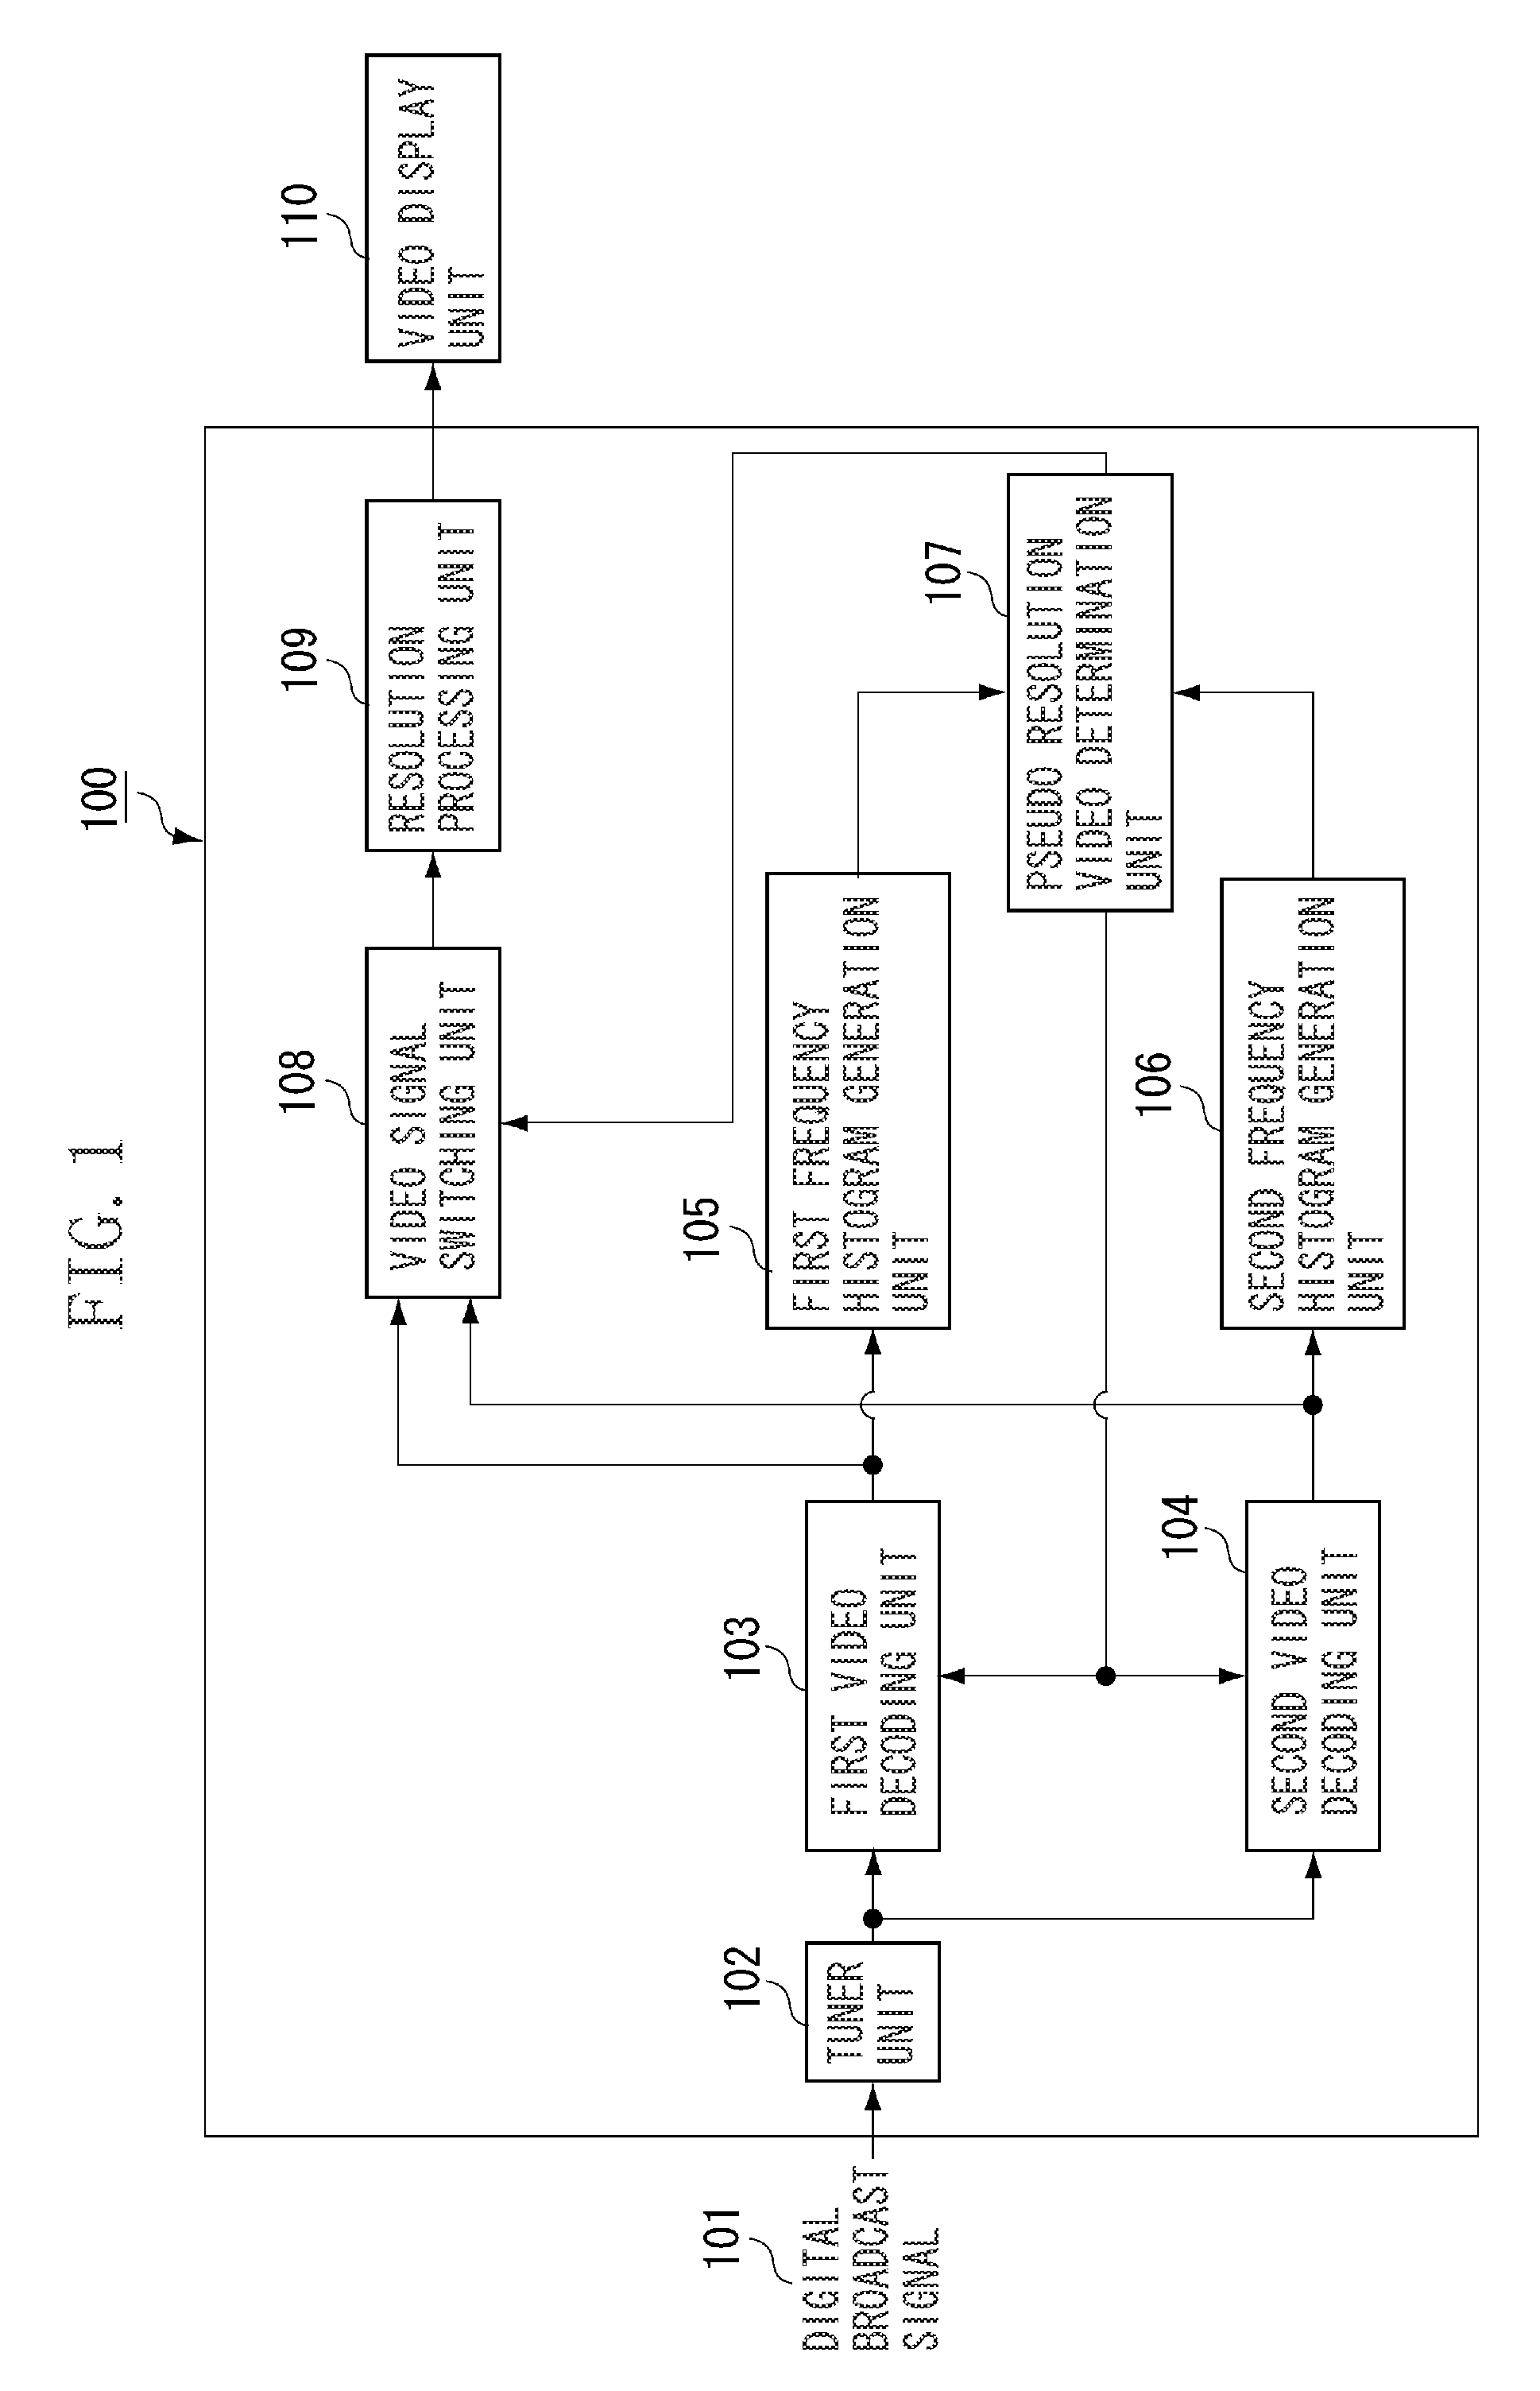 Video processing apparatus and method for controlling the same